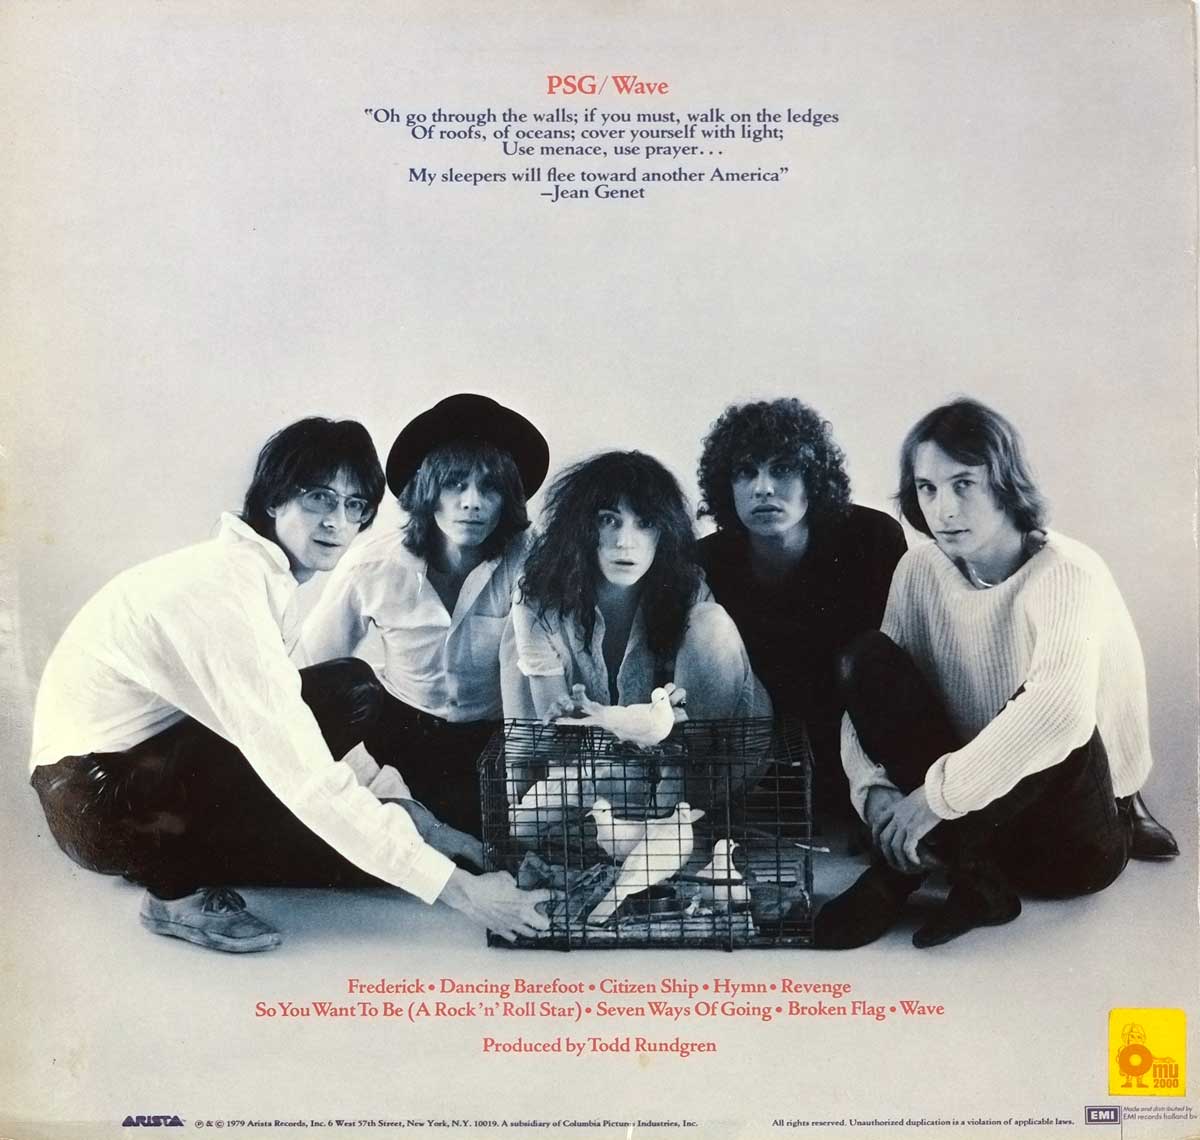 Patti Smith with her band-members on the Album Back Cover  Photo of "PATTI SMITH - Wave"